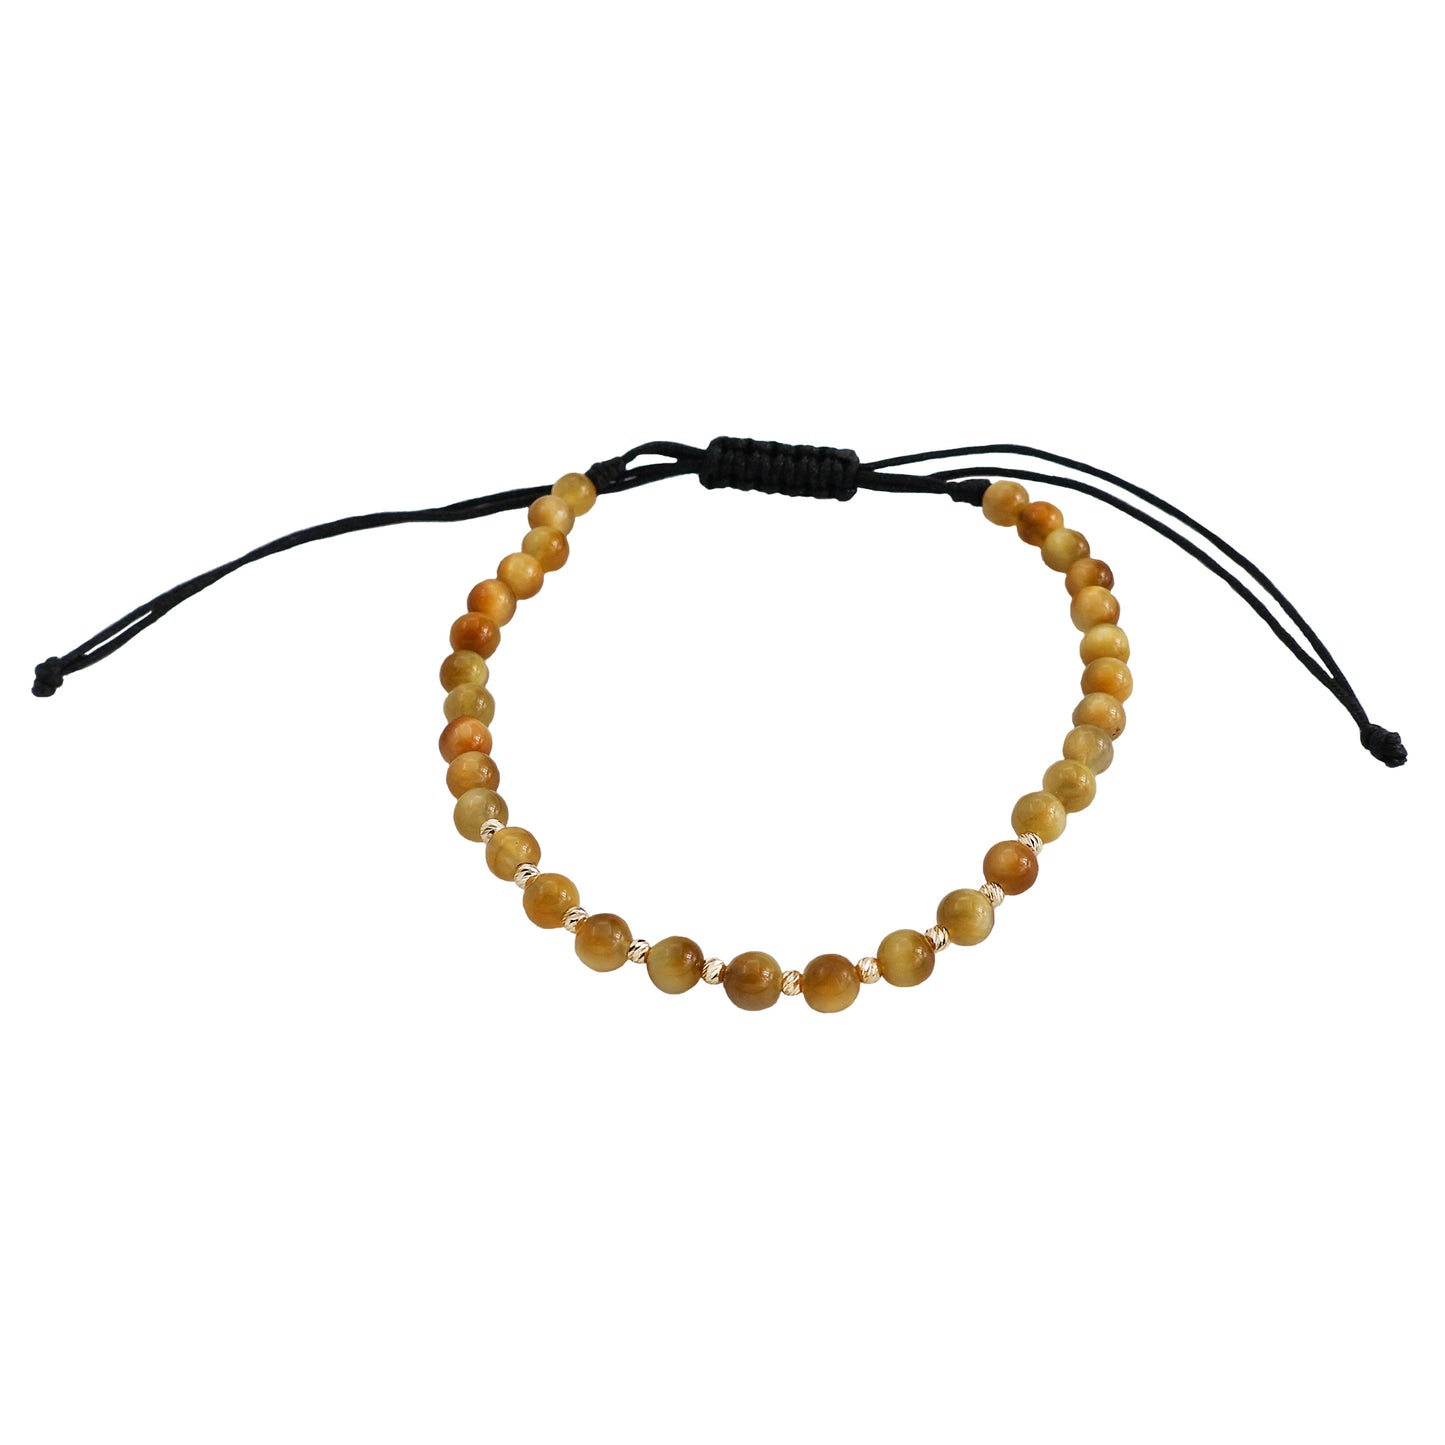 Bracelet with semiprecious agate cat eye stones and 10 beads of 14K solid gold Vega Lopez